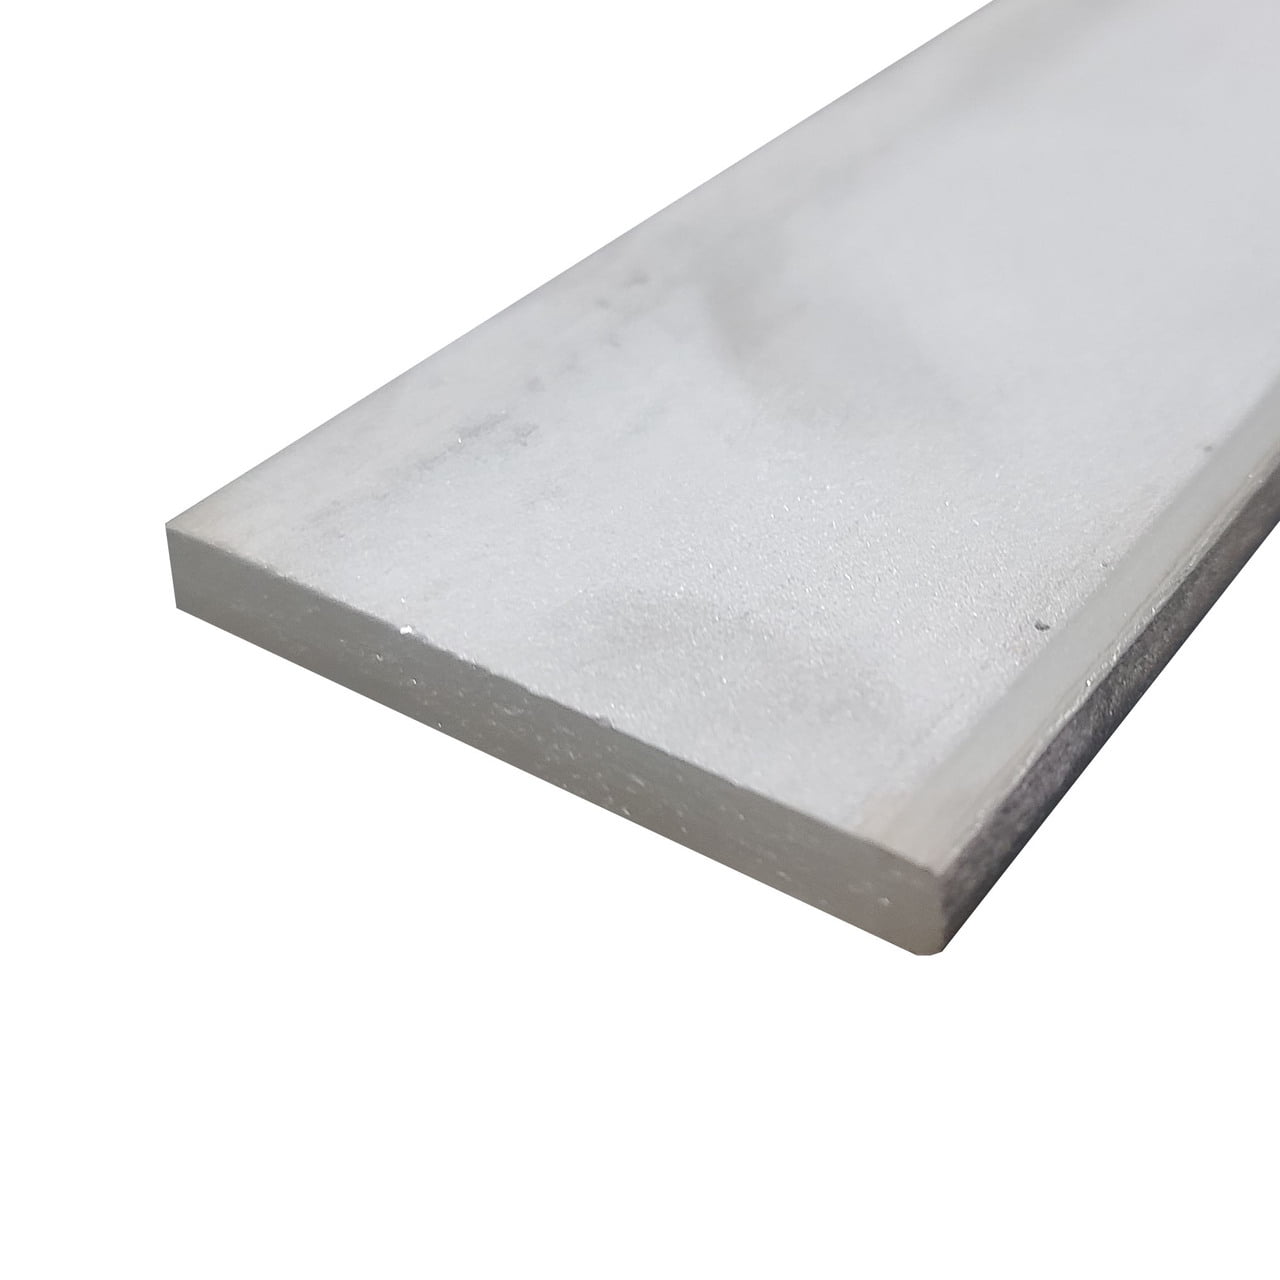 Online Metal Supply 304 Stainless Steel Rectangle Bar 3/8 x 5 x 24